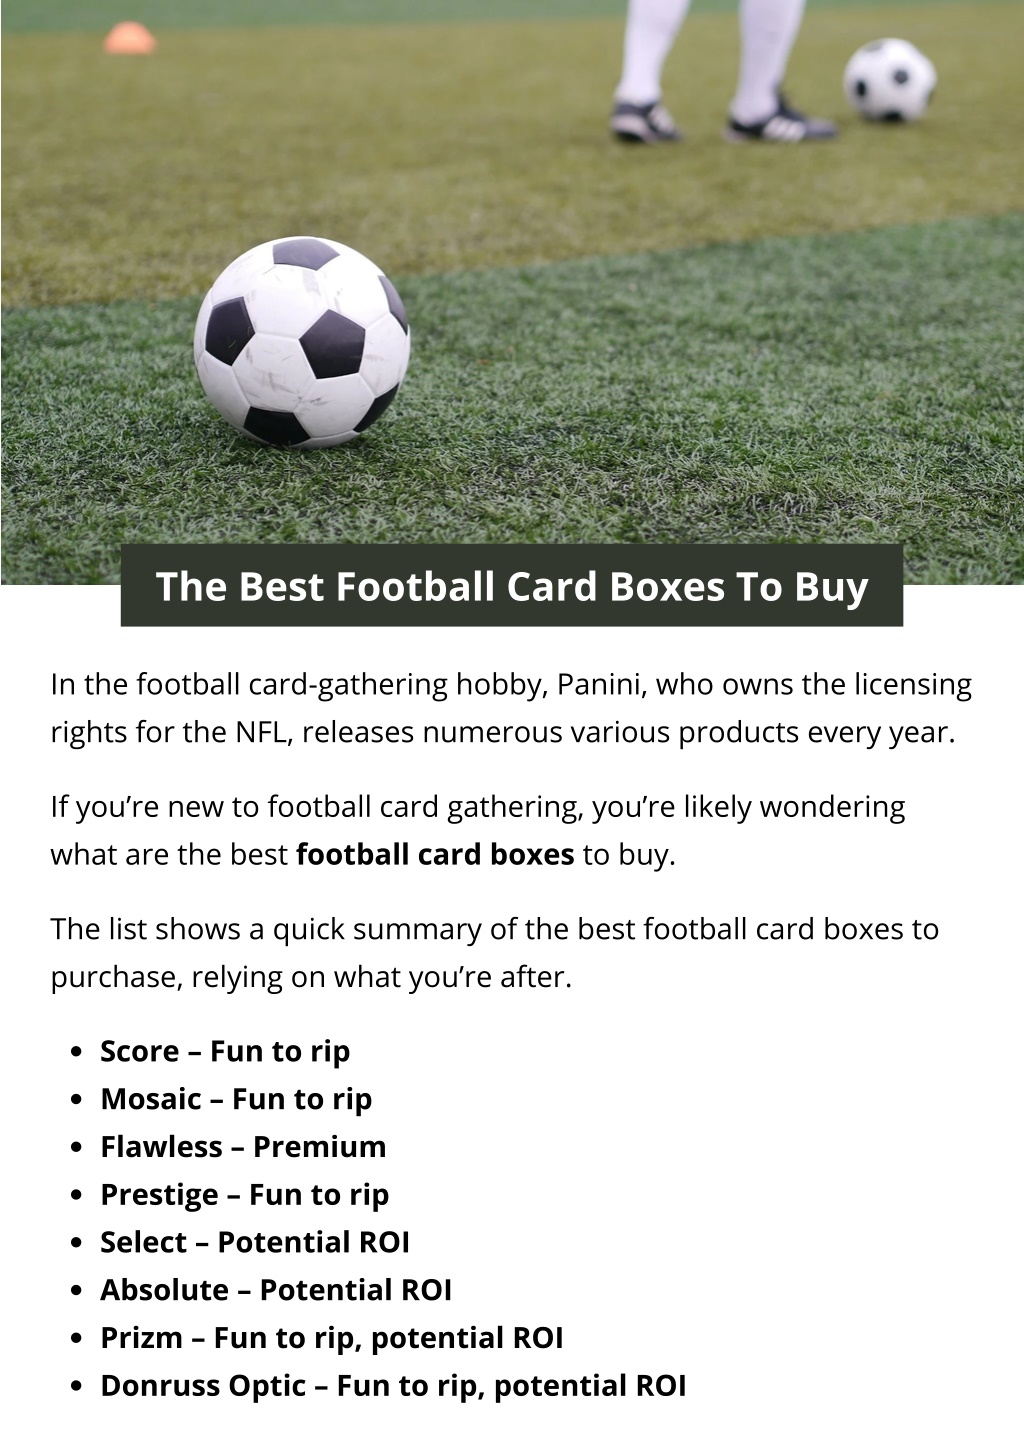 PPT The Best Football Card Boxes To Buy PowerPoint Presentation, free